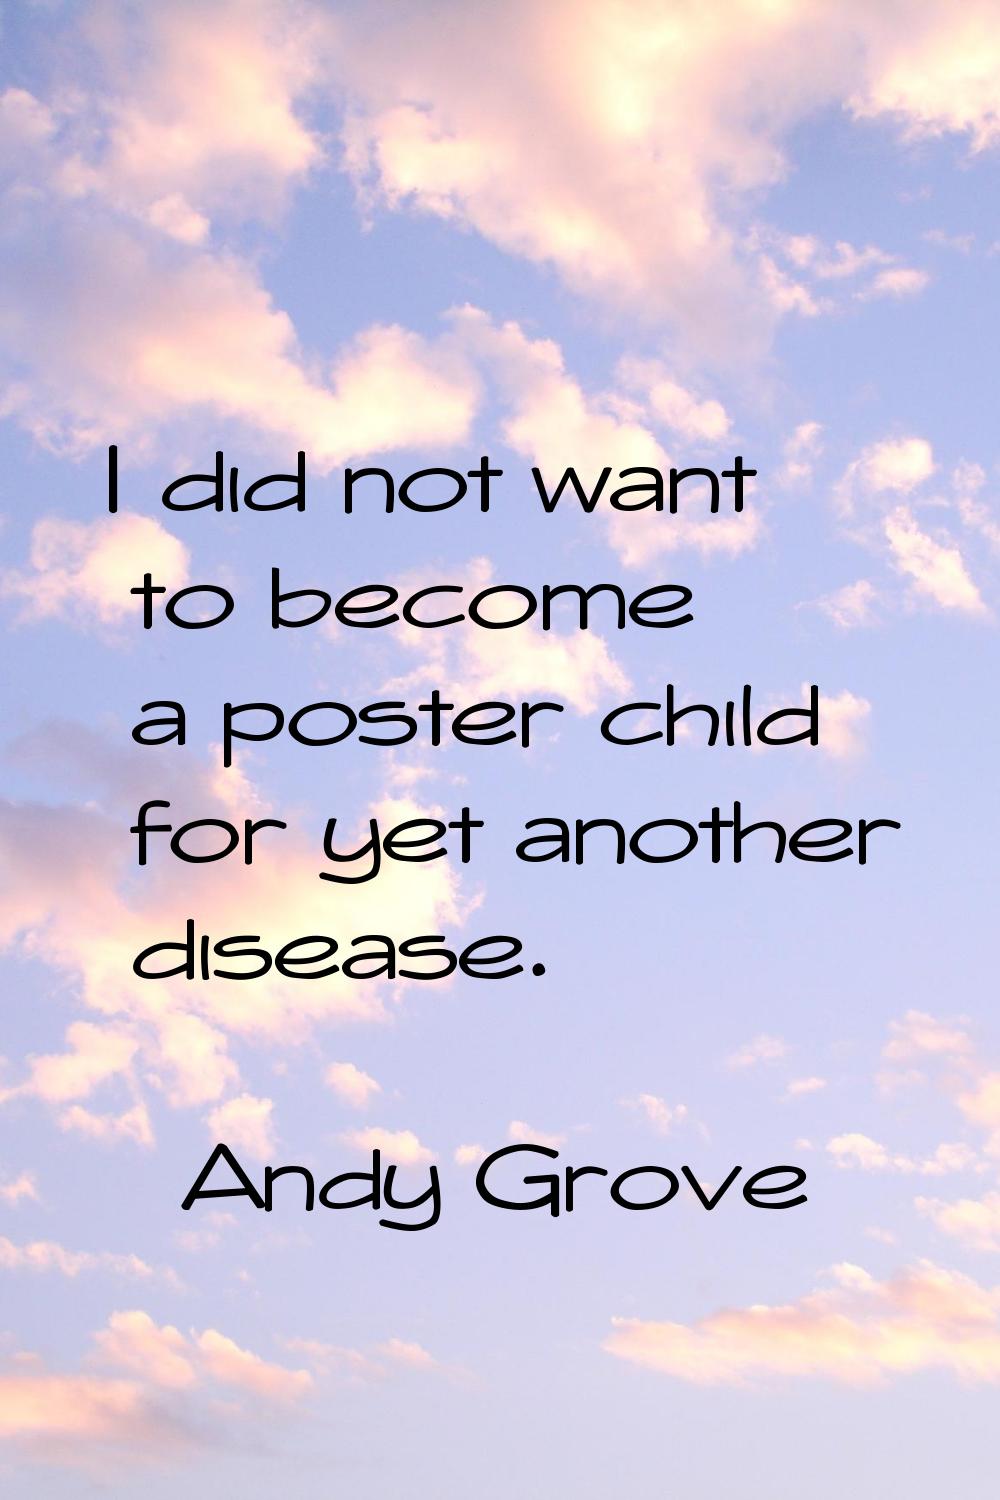 I did not want to become a poster child for yet another disease.